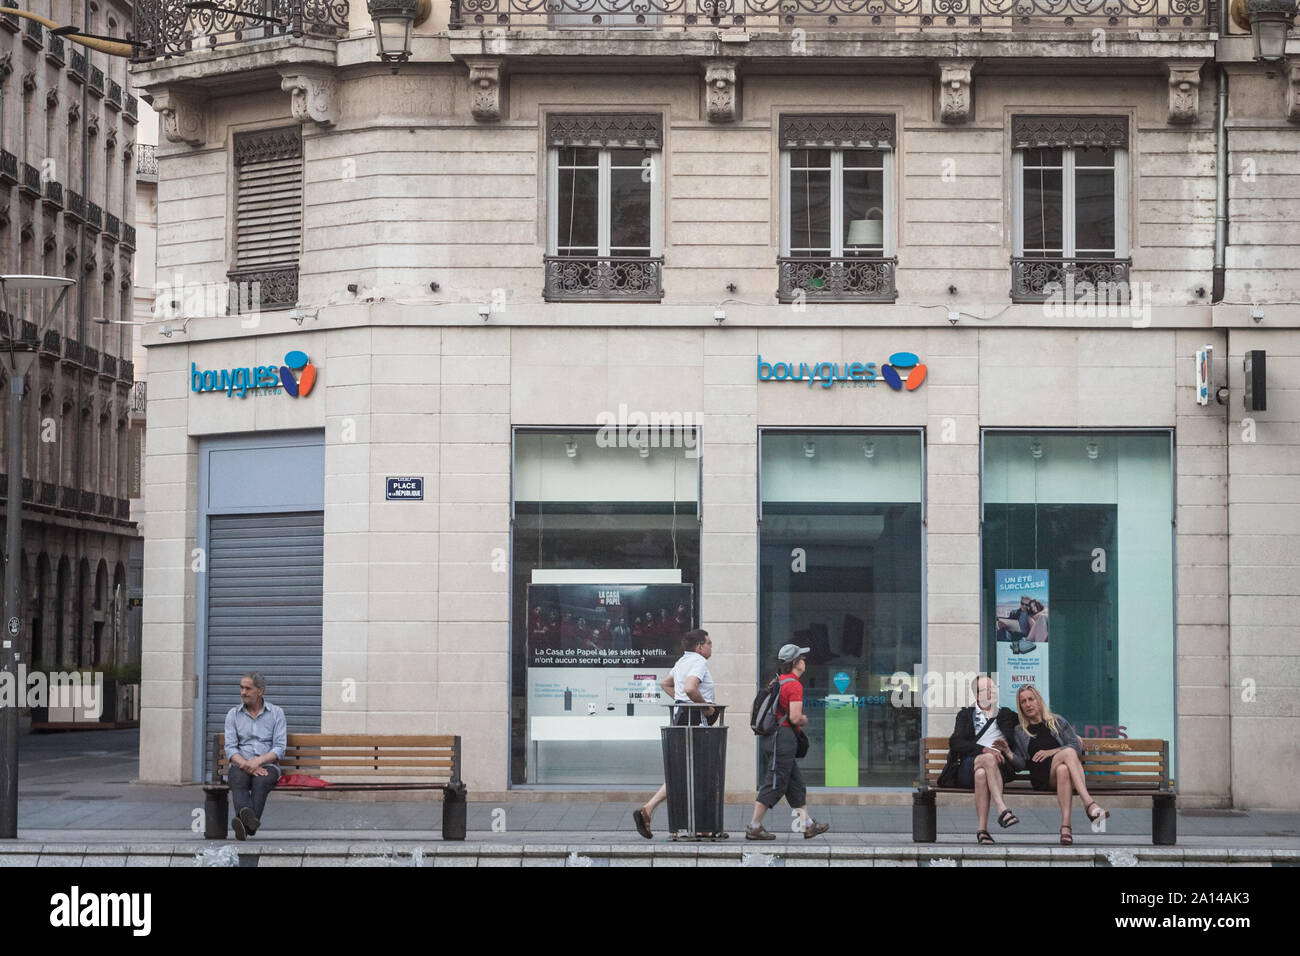 LYON, FRANCE - JULY 14, 2018: Bouygues Telecom logo on their main shop in Lyon. Bouygues Telecom is a French mobile phone, Internet service provider a Stock Photo